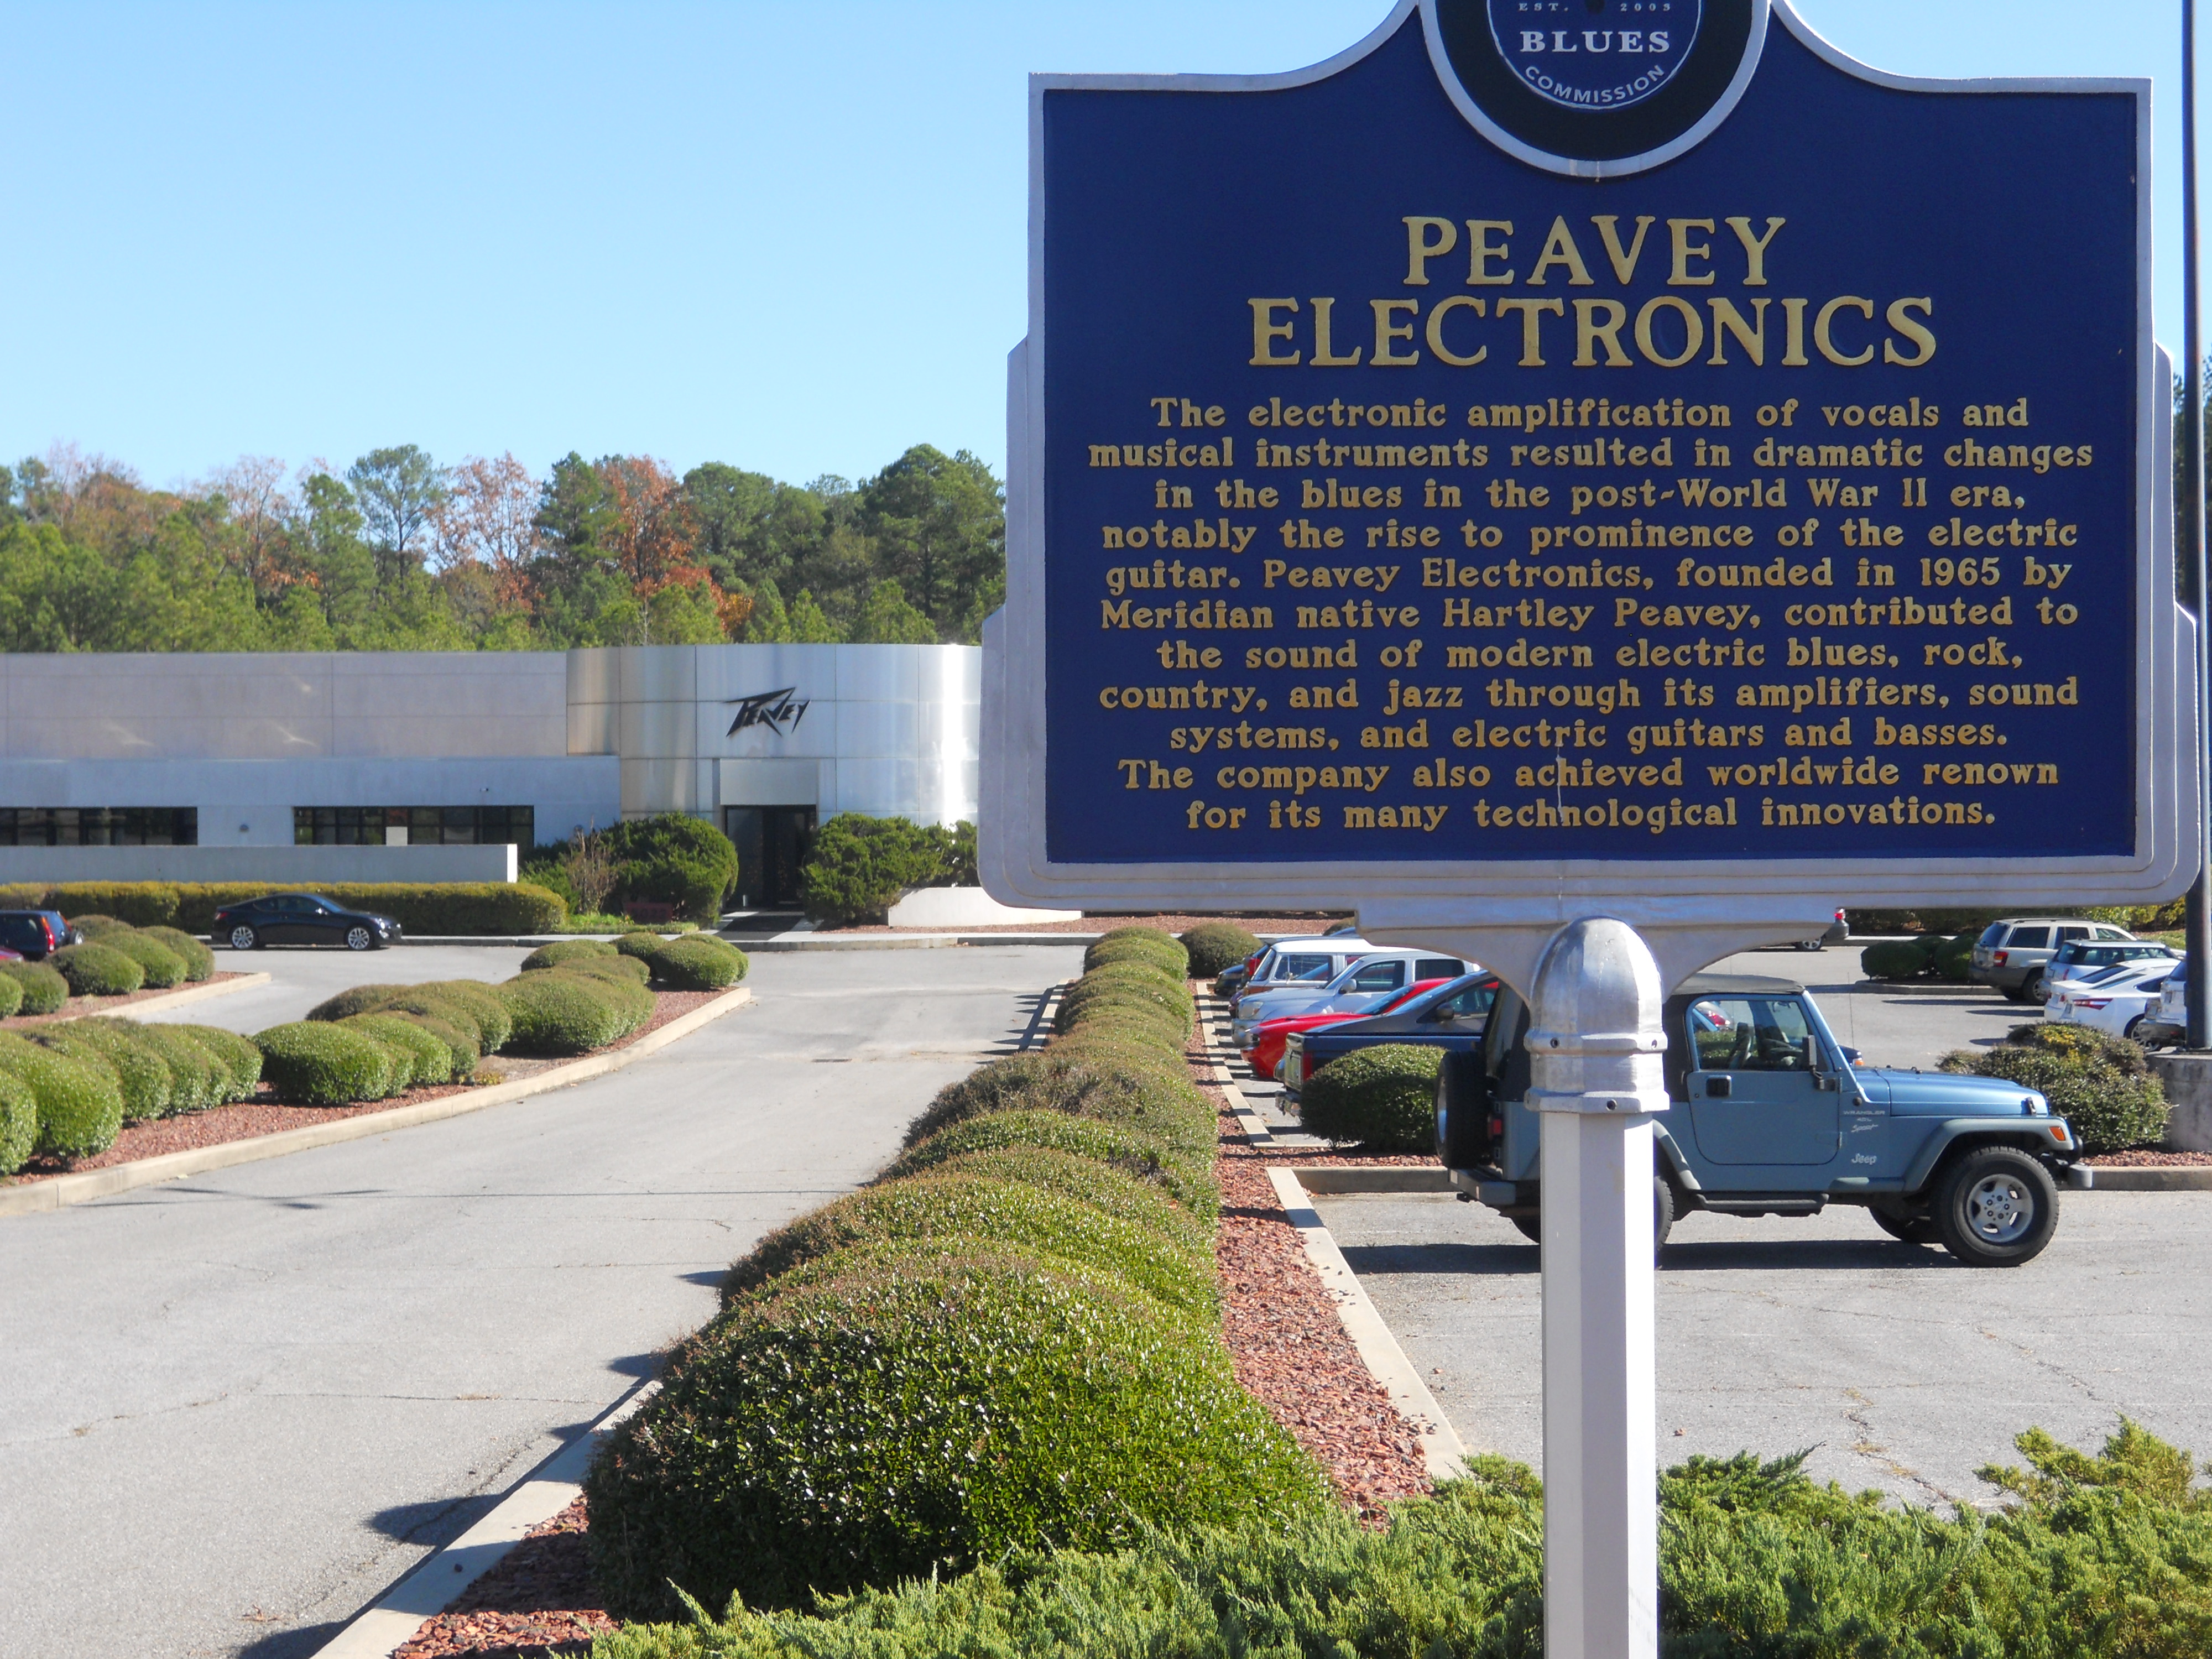 Schoolnik is on the road again, visiting Peavey Electonics in Meridian Mississippi. Metal corporate office building with historical marker in foreground.